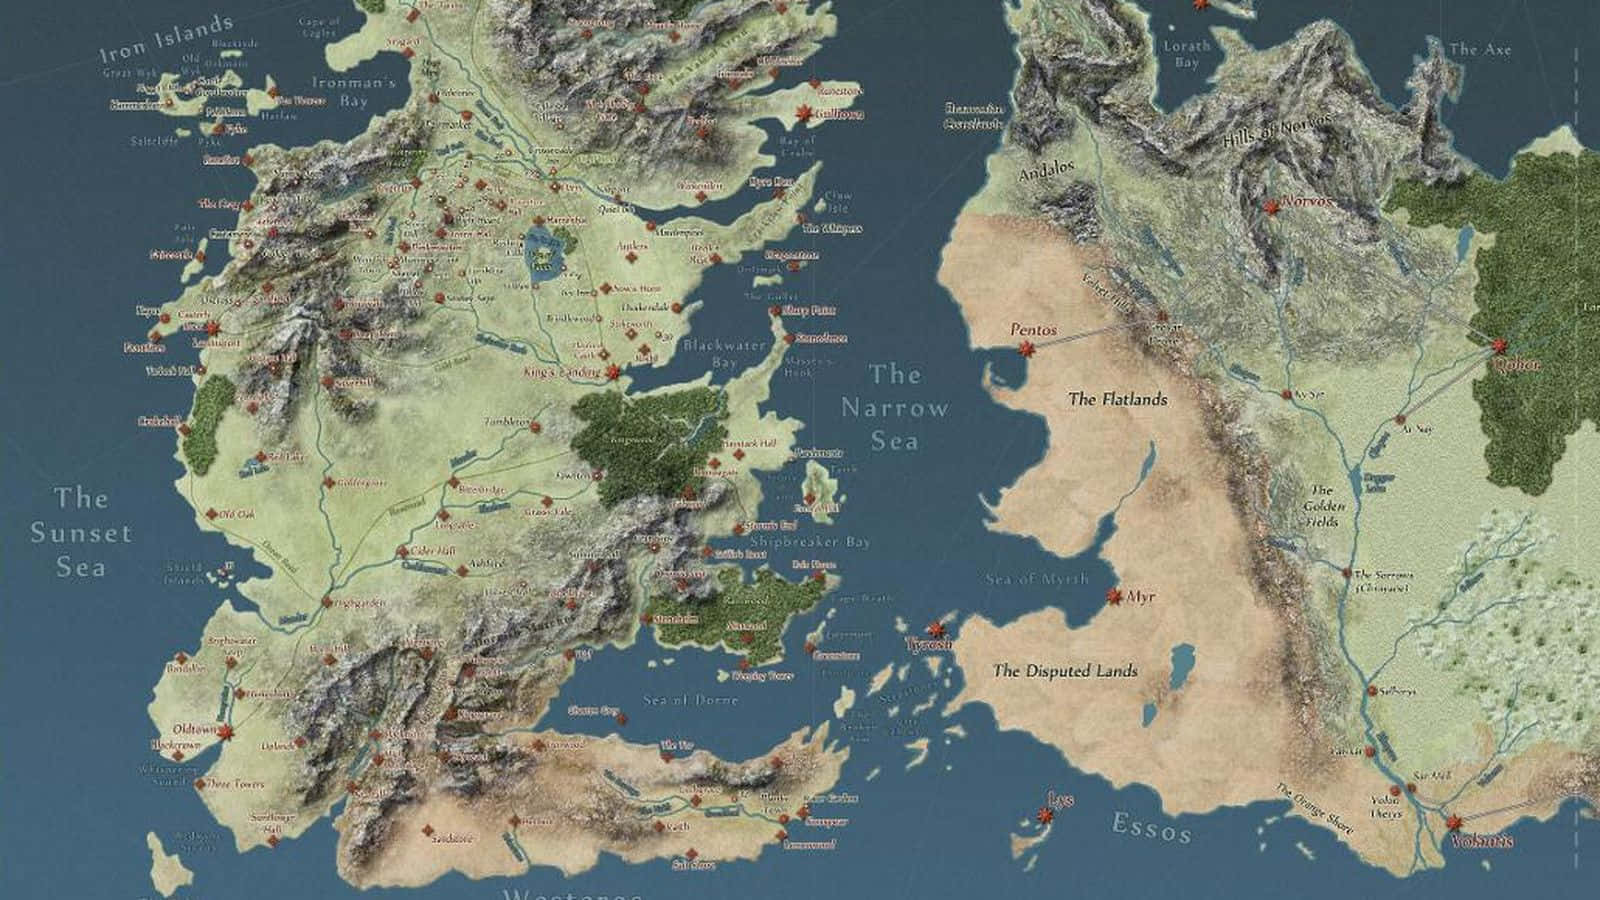 Game of Thrones, world, map, A Song of Ice and Fire, backgound, Westeros, HD  wallpaper | Wallpaperbetter